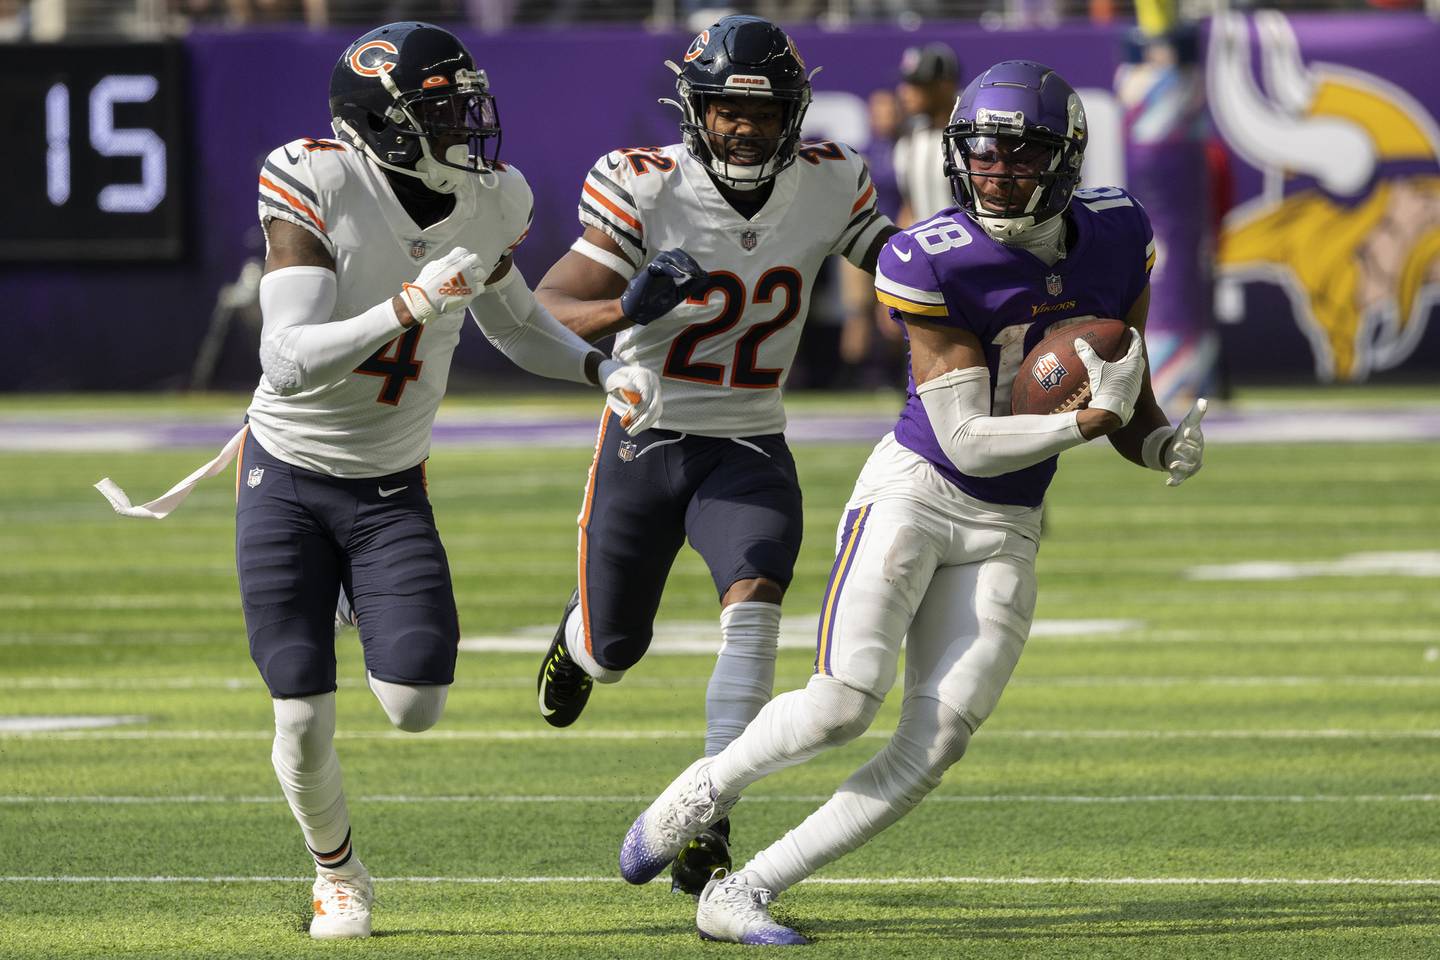 Bears cornerback Kindle Vildor and safety Eddie Jackson can’t stop Vikings wide receiver Justin Jefferson during the second quarter at U.S Bank Stadium on Oct. 9, 2022.